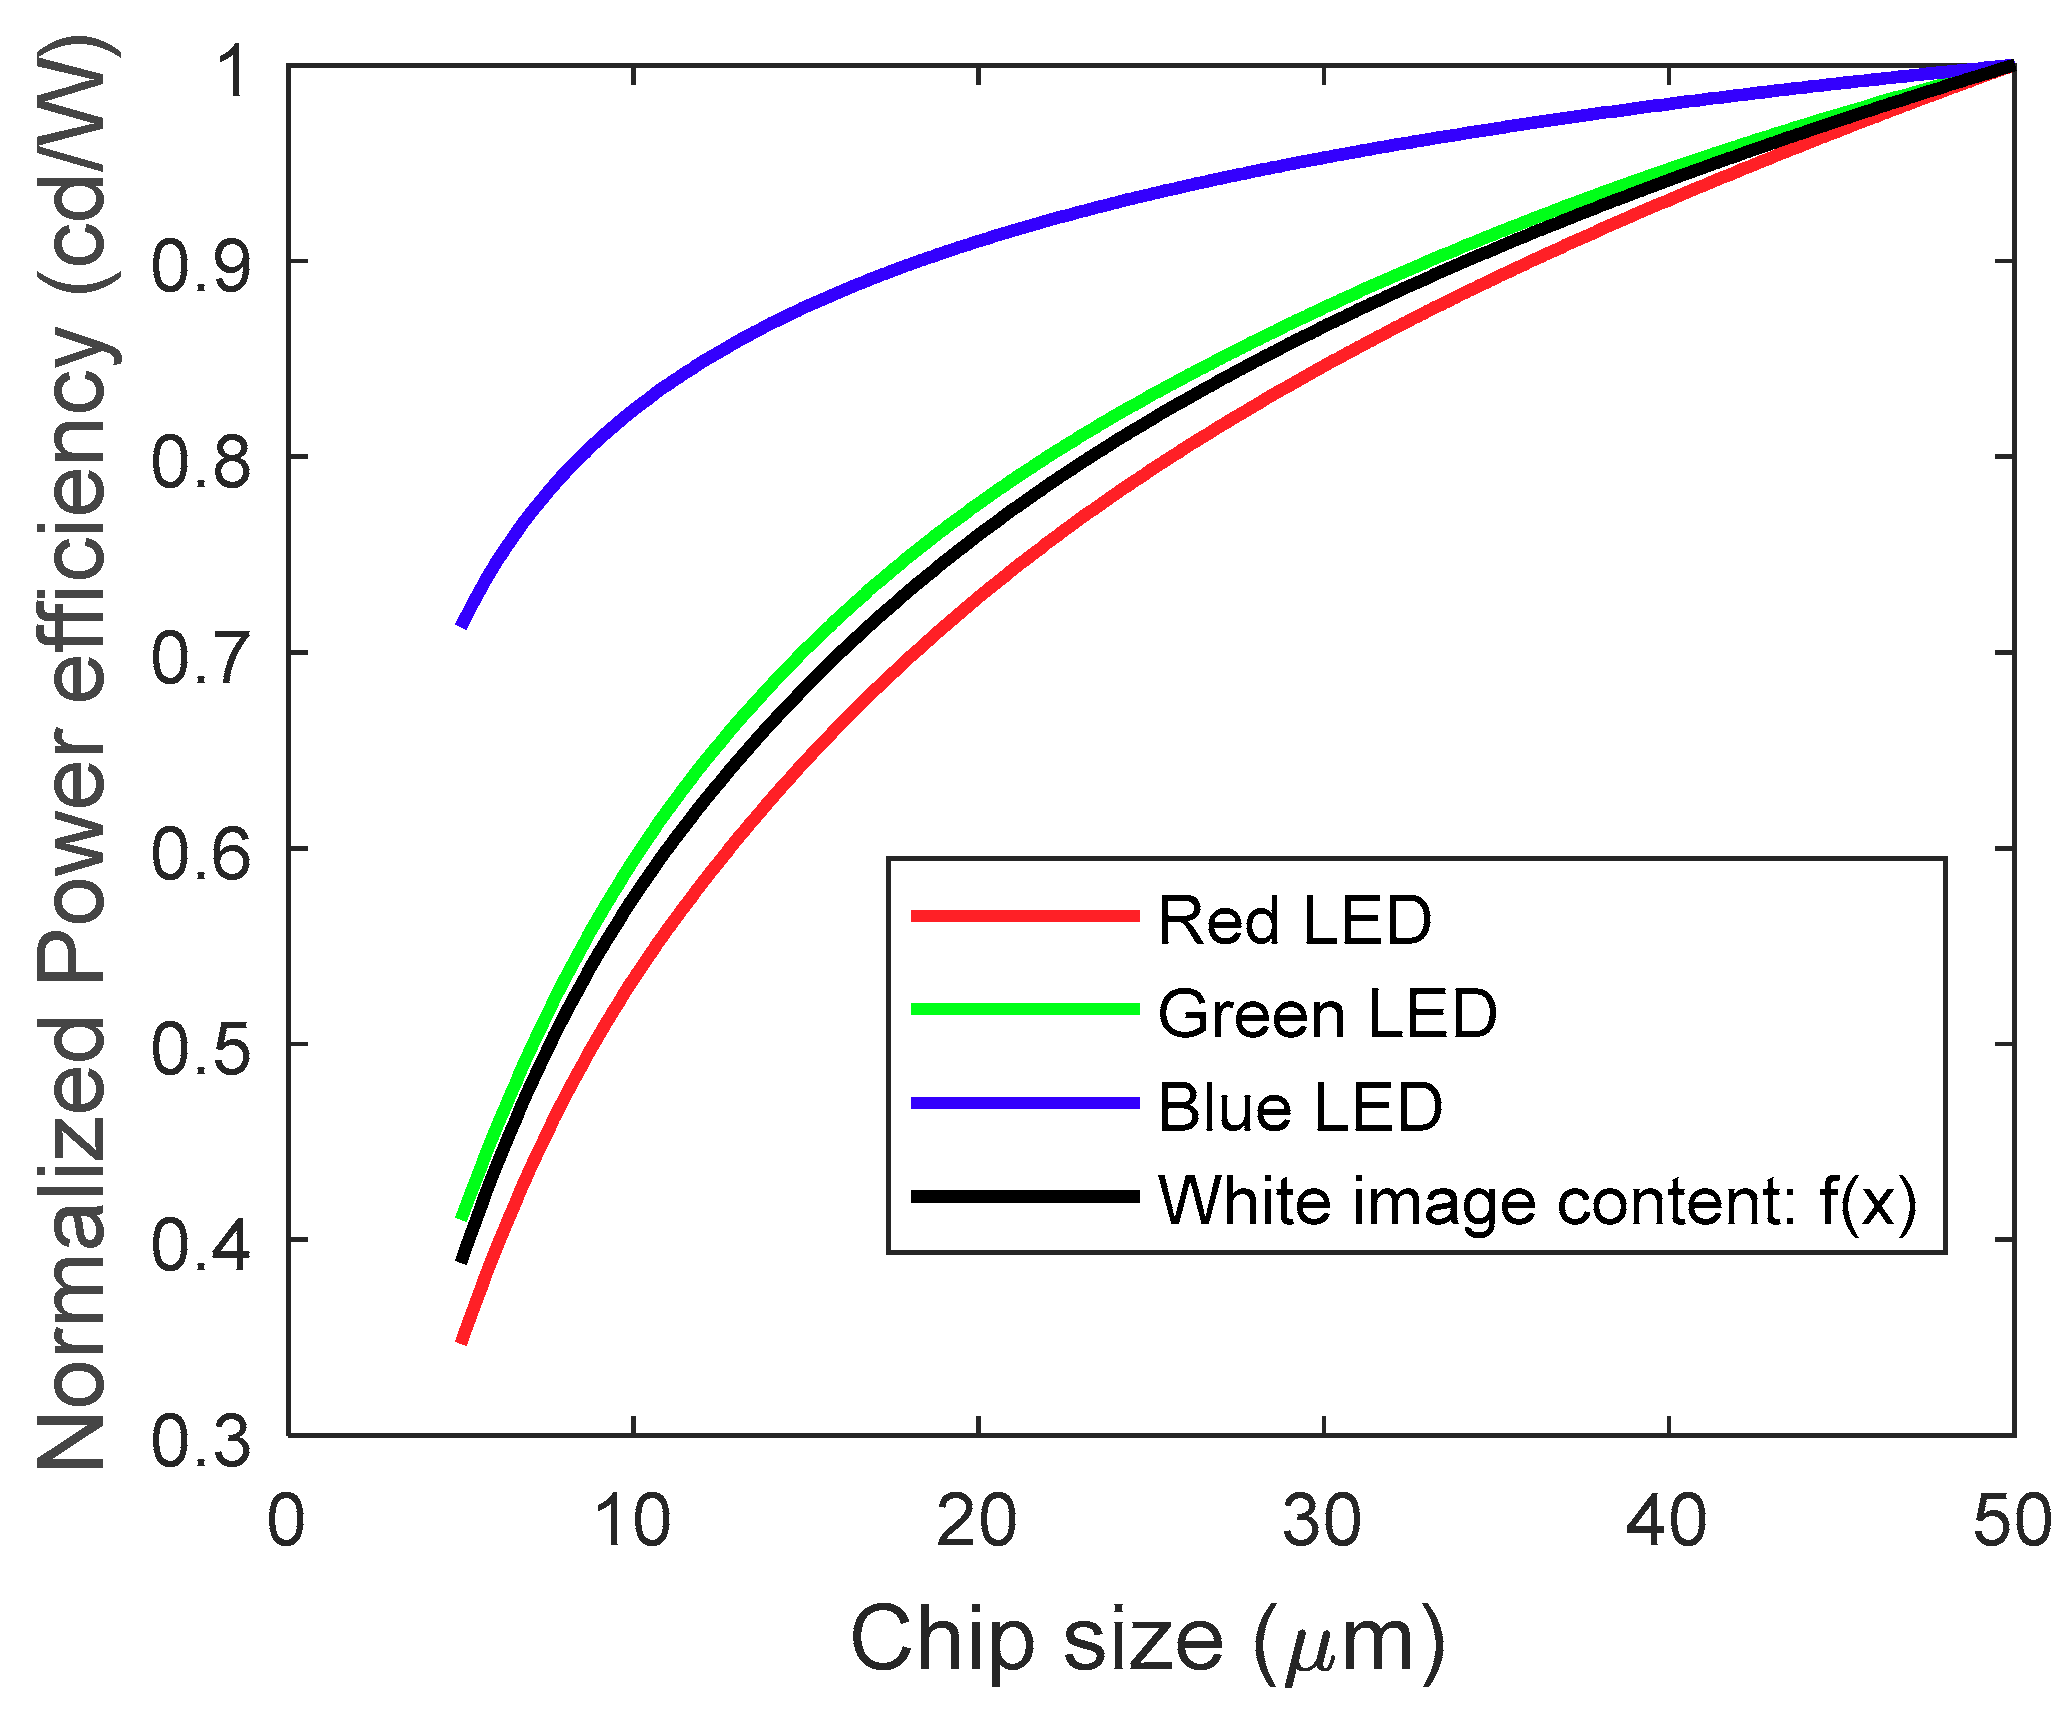 Crystals | Free Full-Text | Improving the Power Efficiency of Micro-LED with Optimized LED Sizes